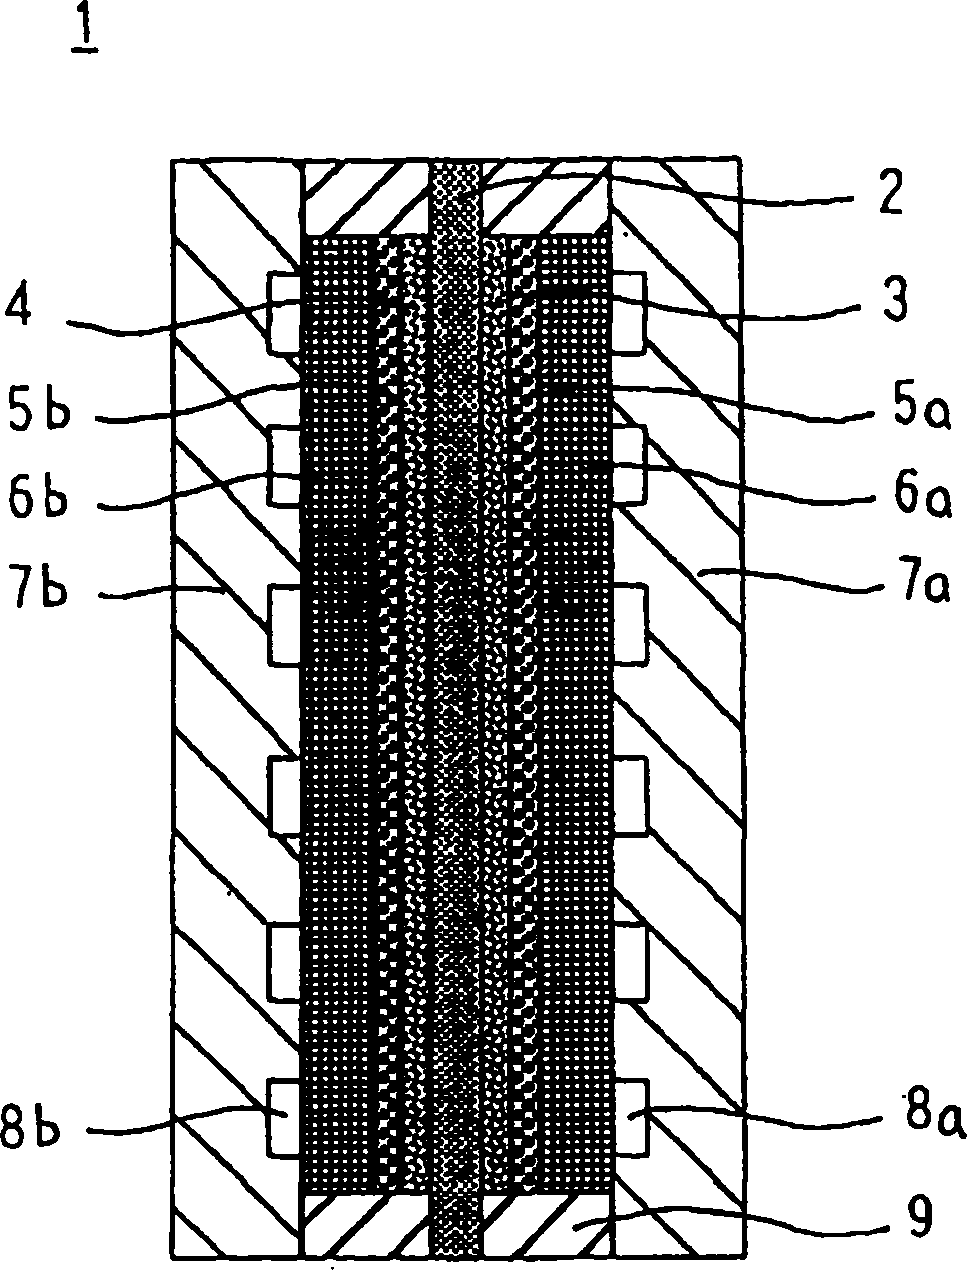 Polymer electrolyte fuel cell and manufacturing method